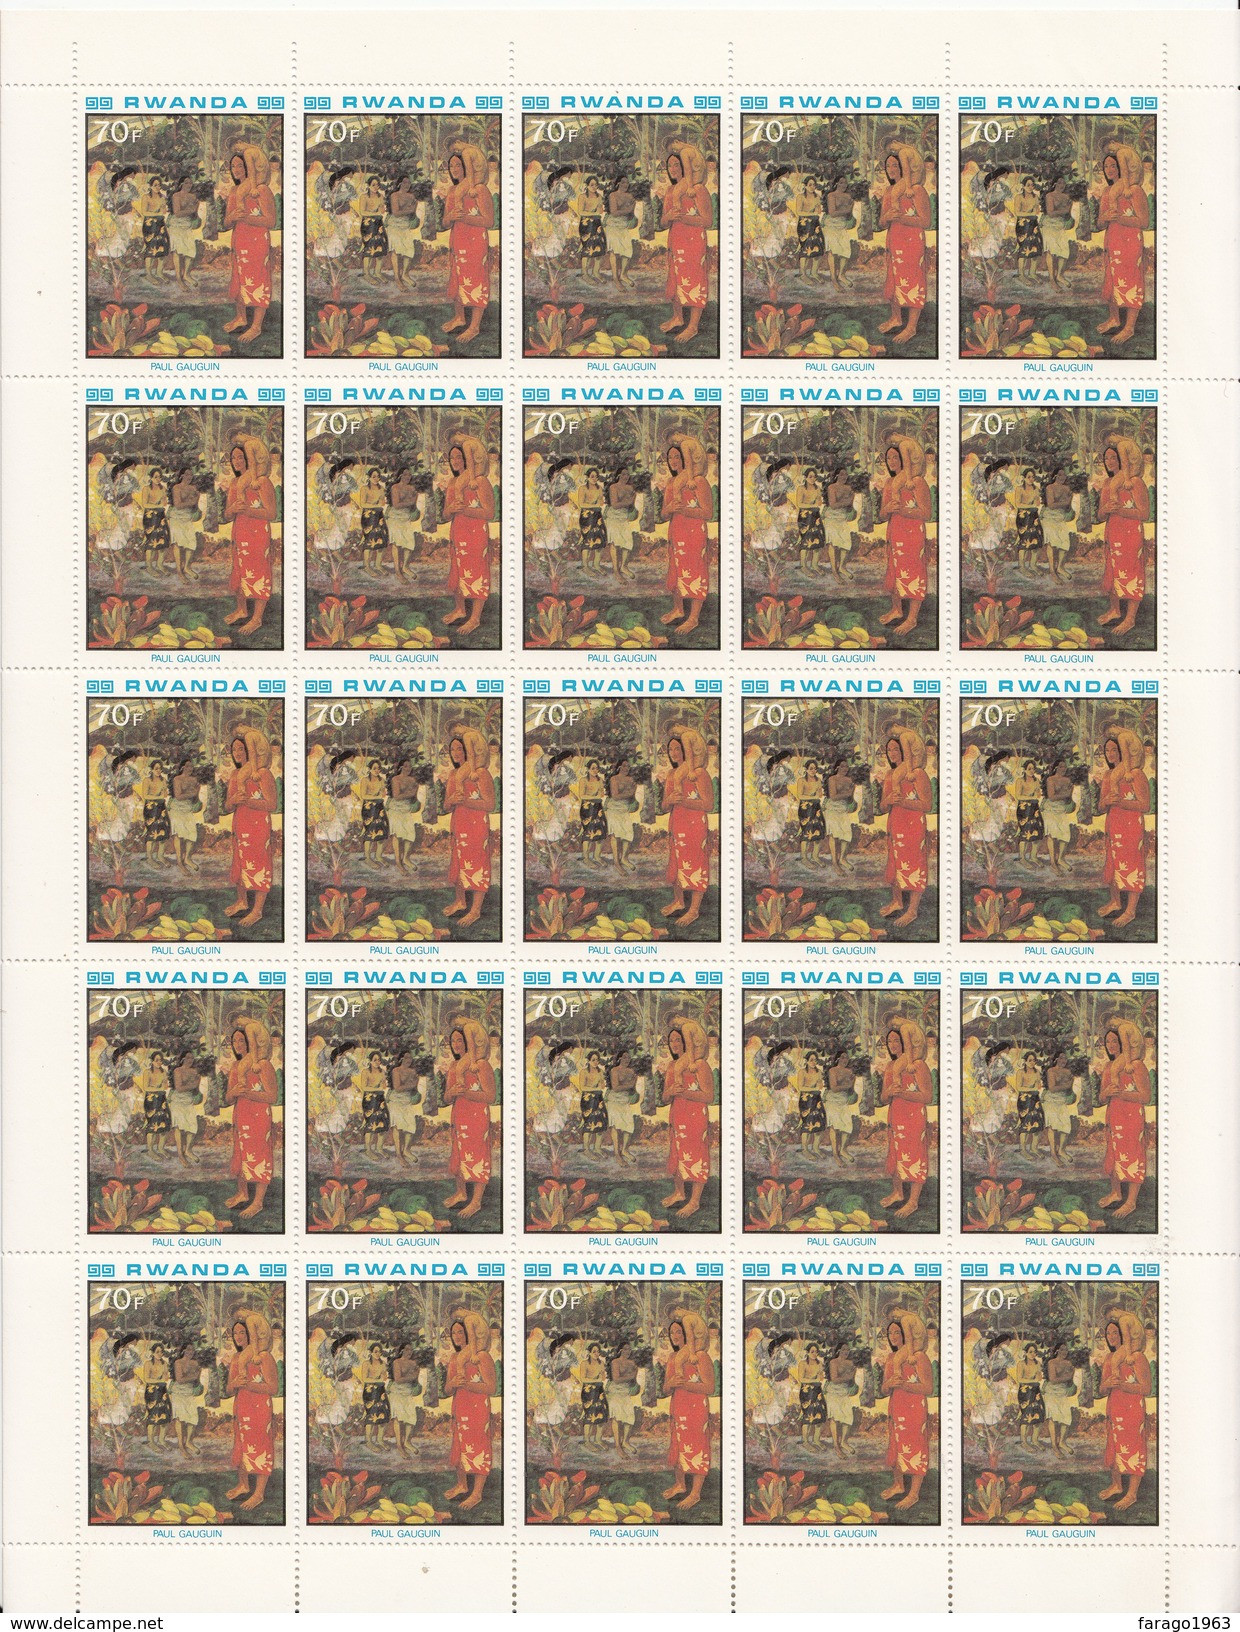 1980 Rwanda 70F Gauguin "Tahaitian Women" Painting Complete Sheet Of 25 MNH  SUPER CHEAP Not In Every Collection - Impressionismo